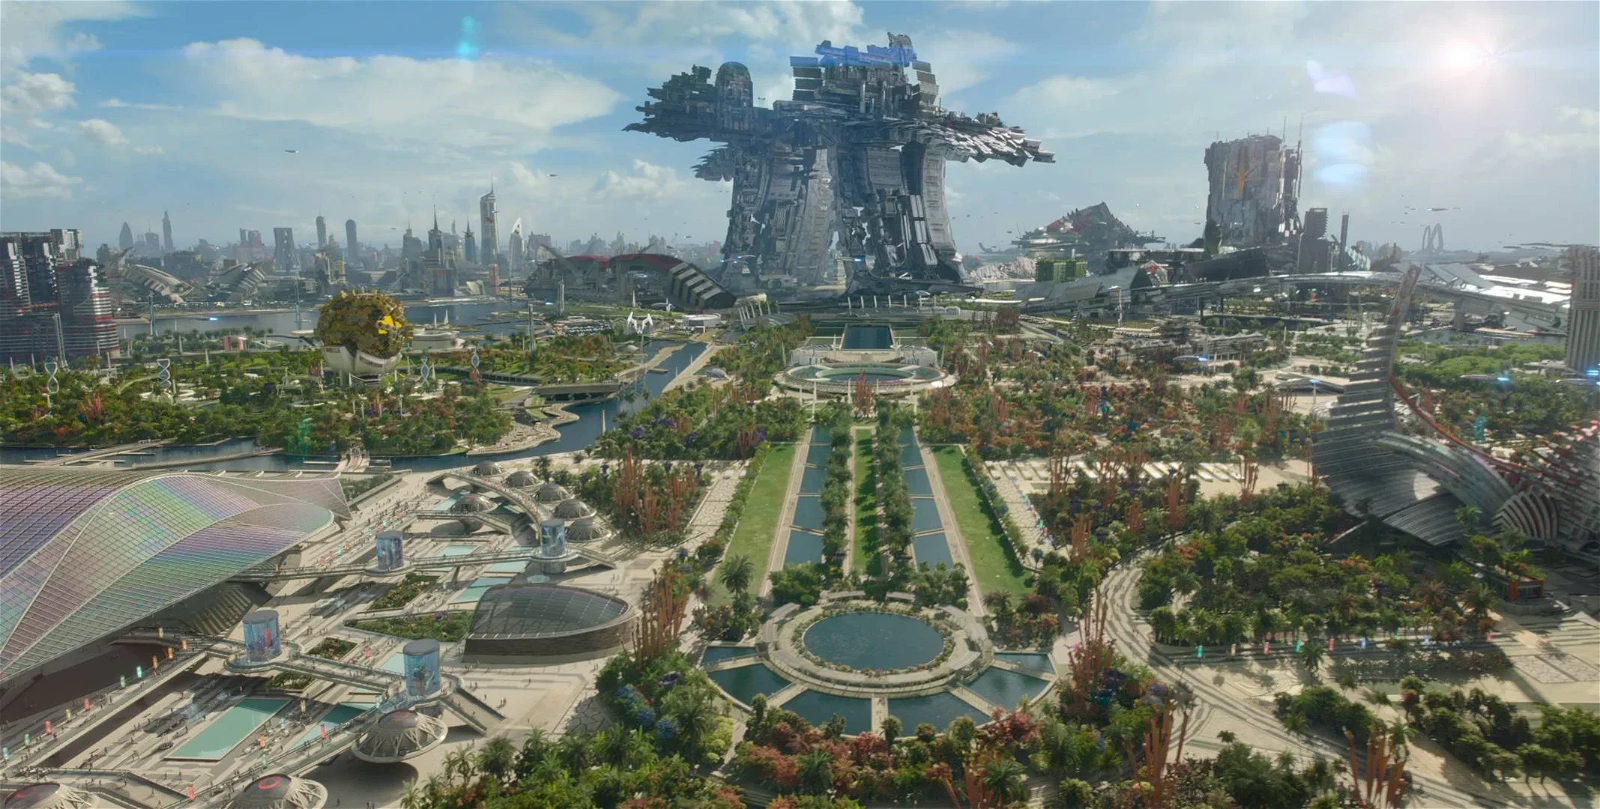 The planet of Xandar designed by Ray Chan in Guardians of the Galaxy